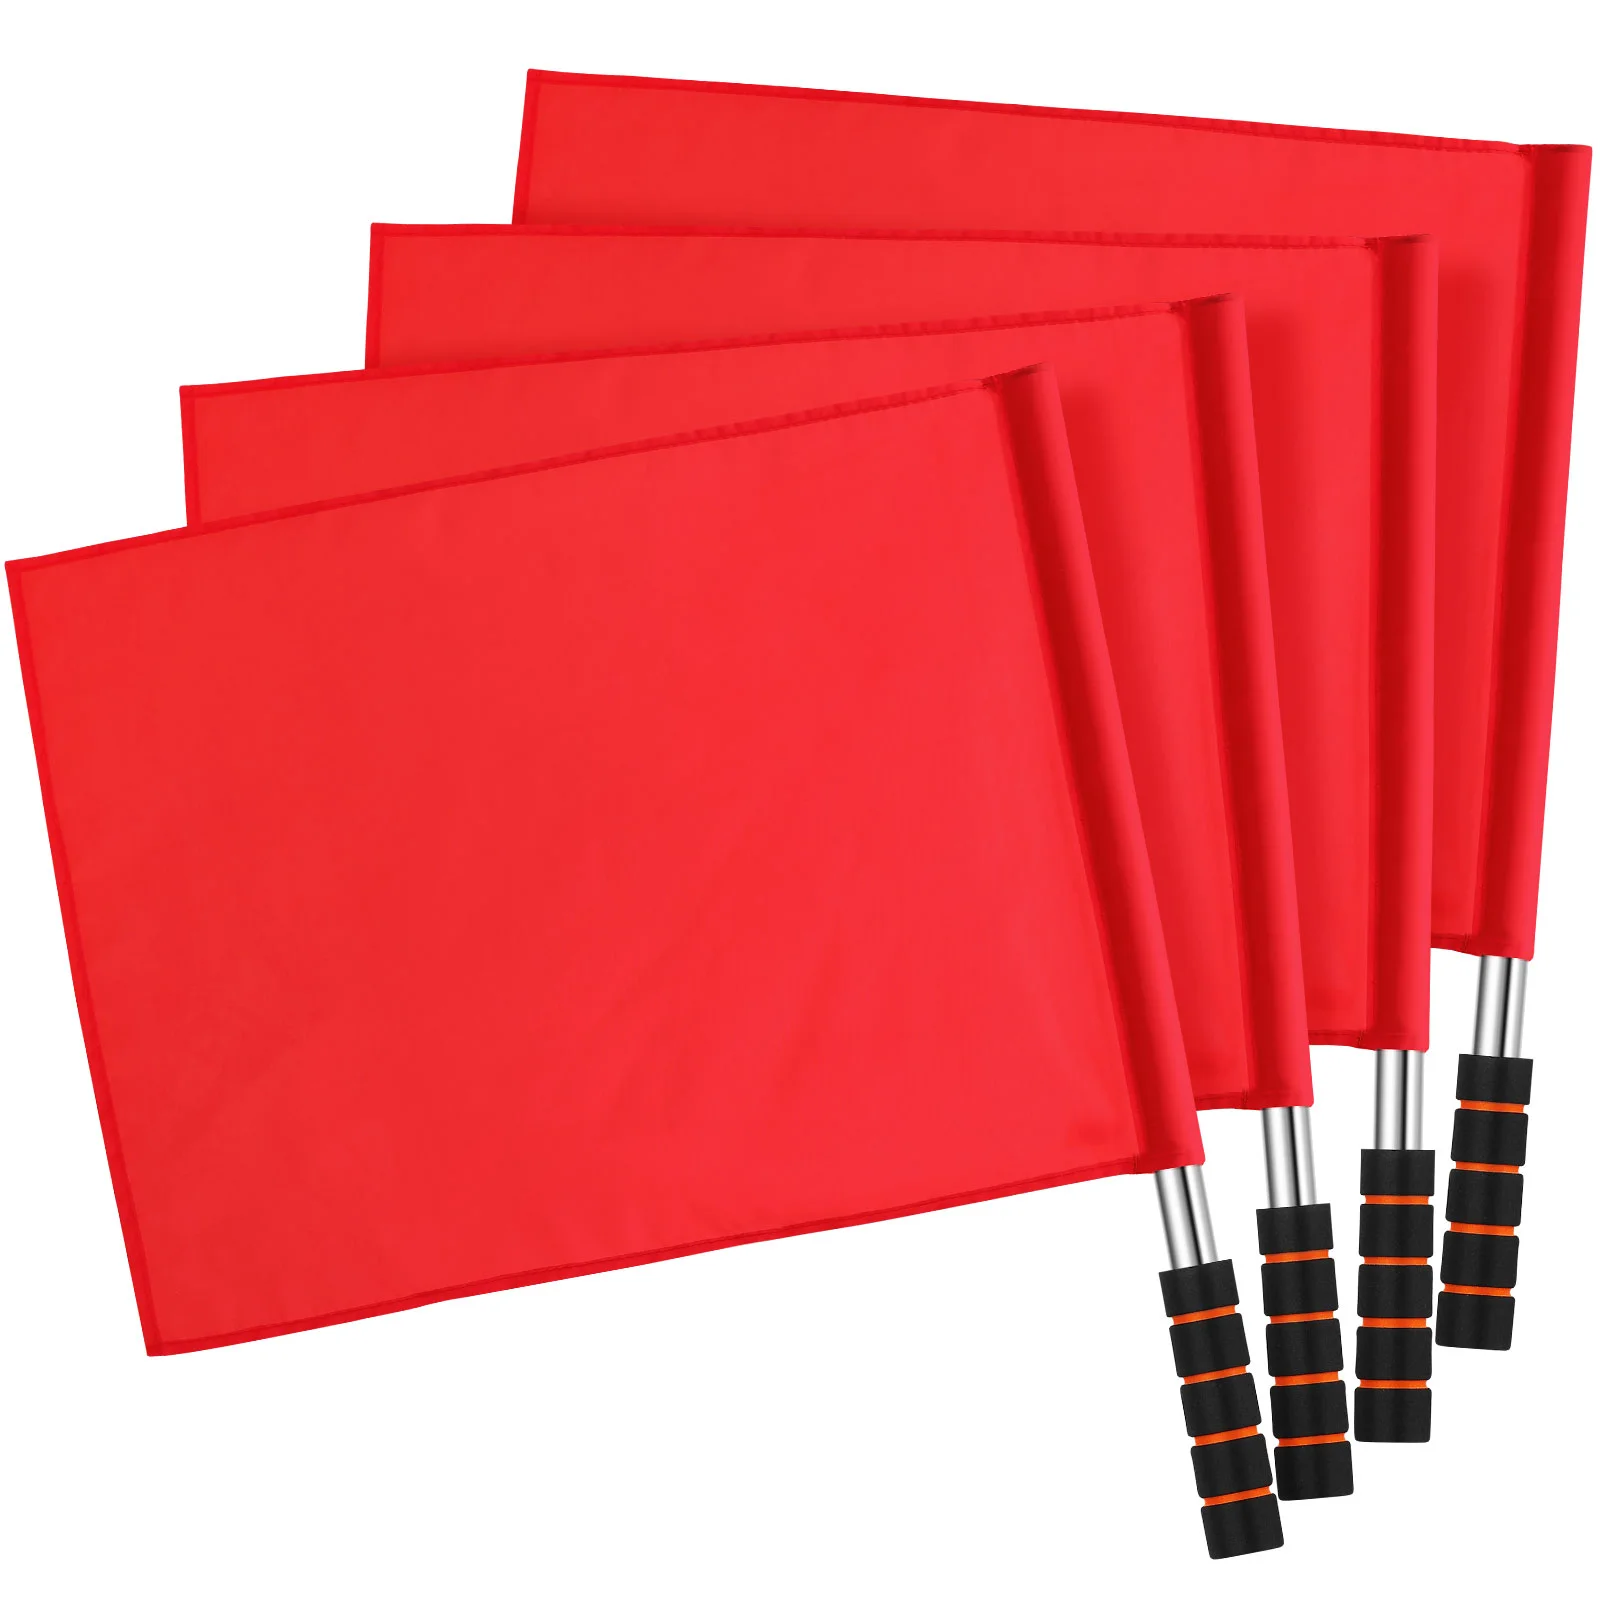 Referee Flags Hand Waving Referee Signal Flag For Game Play Practical Sports Training Match Competition Survival Equipment 4 pcs referee flag handheld signal flags sports equipment football waving colored polyester match